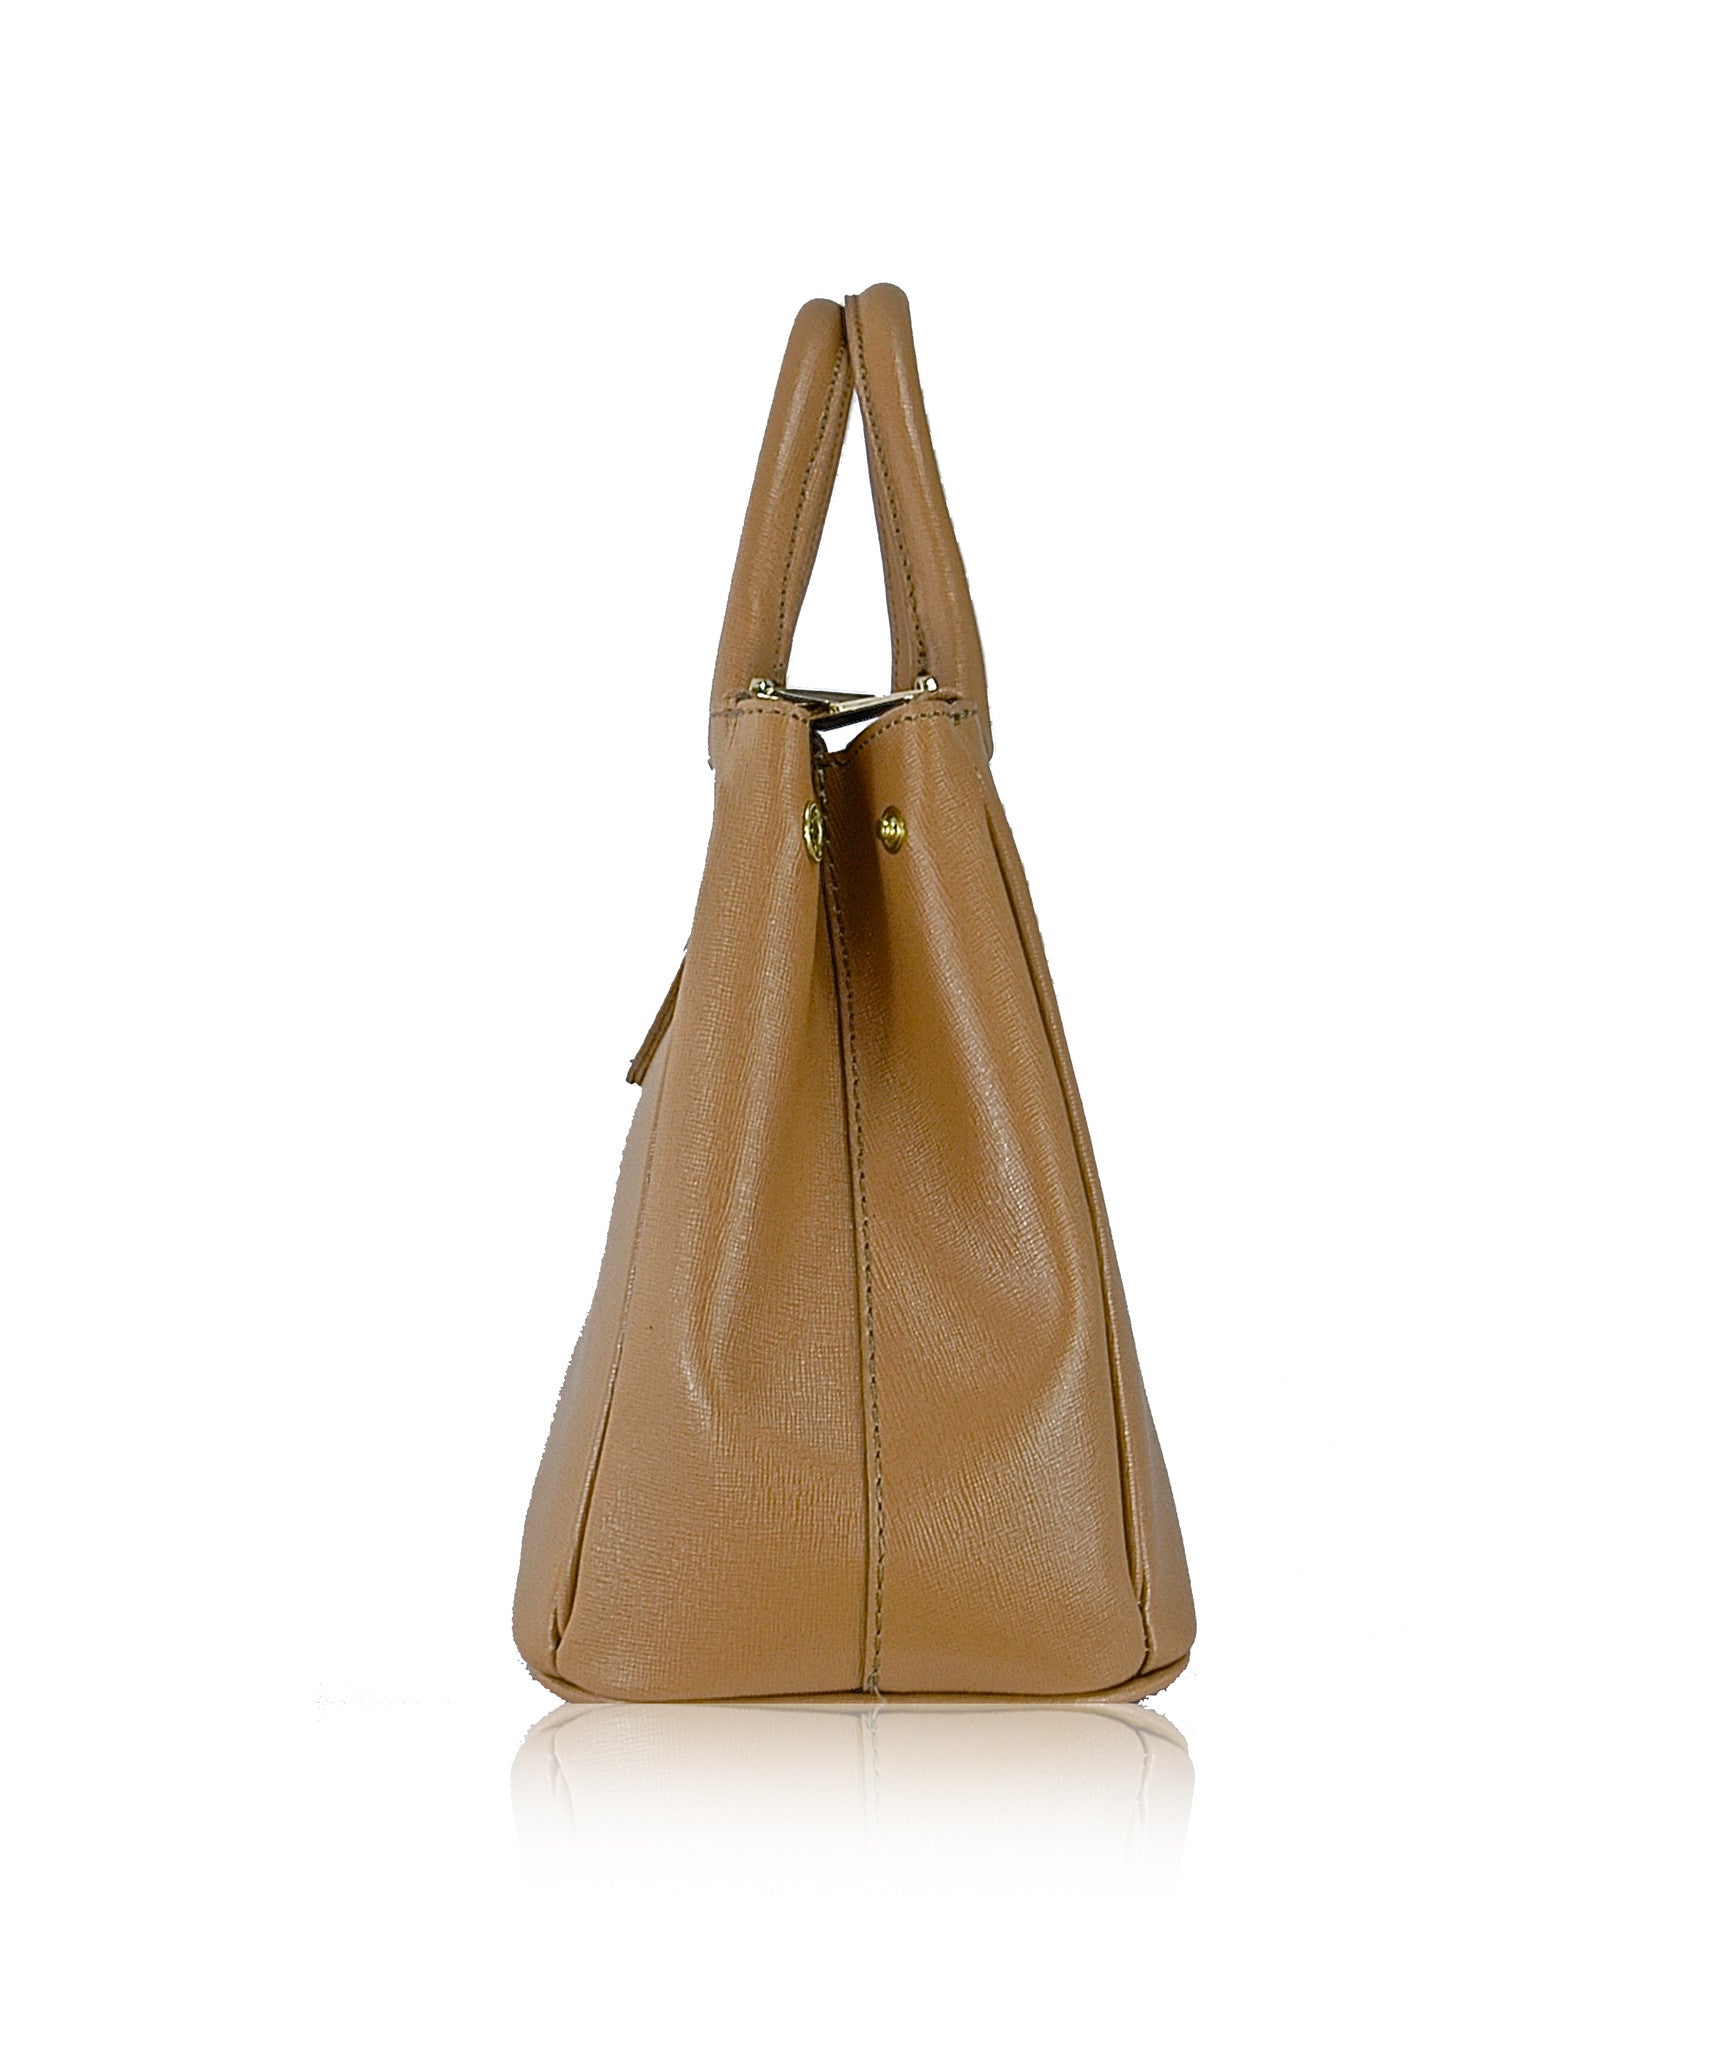 Italian Leather Handbags - View All Collections Page 2| Florence ...